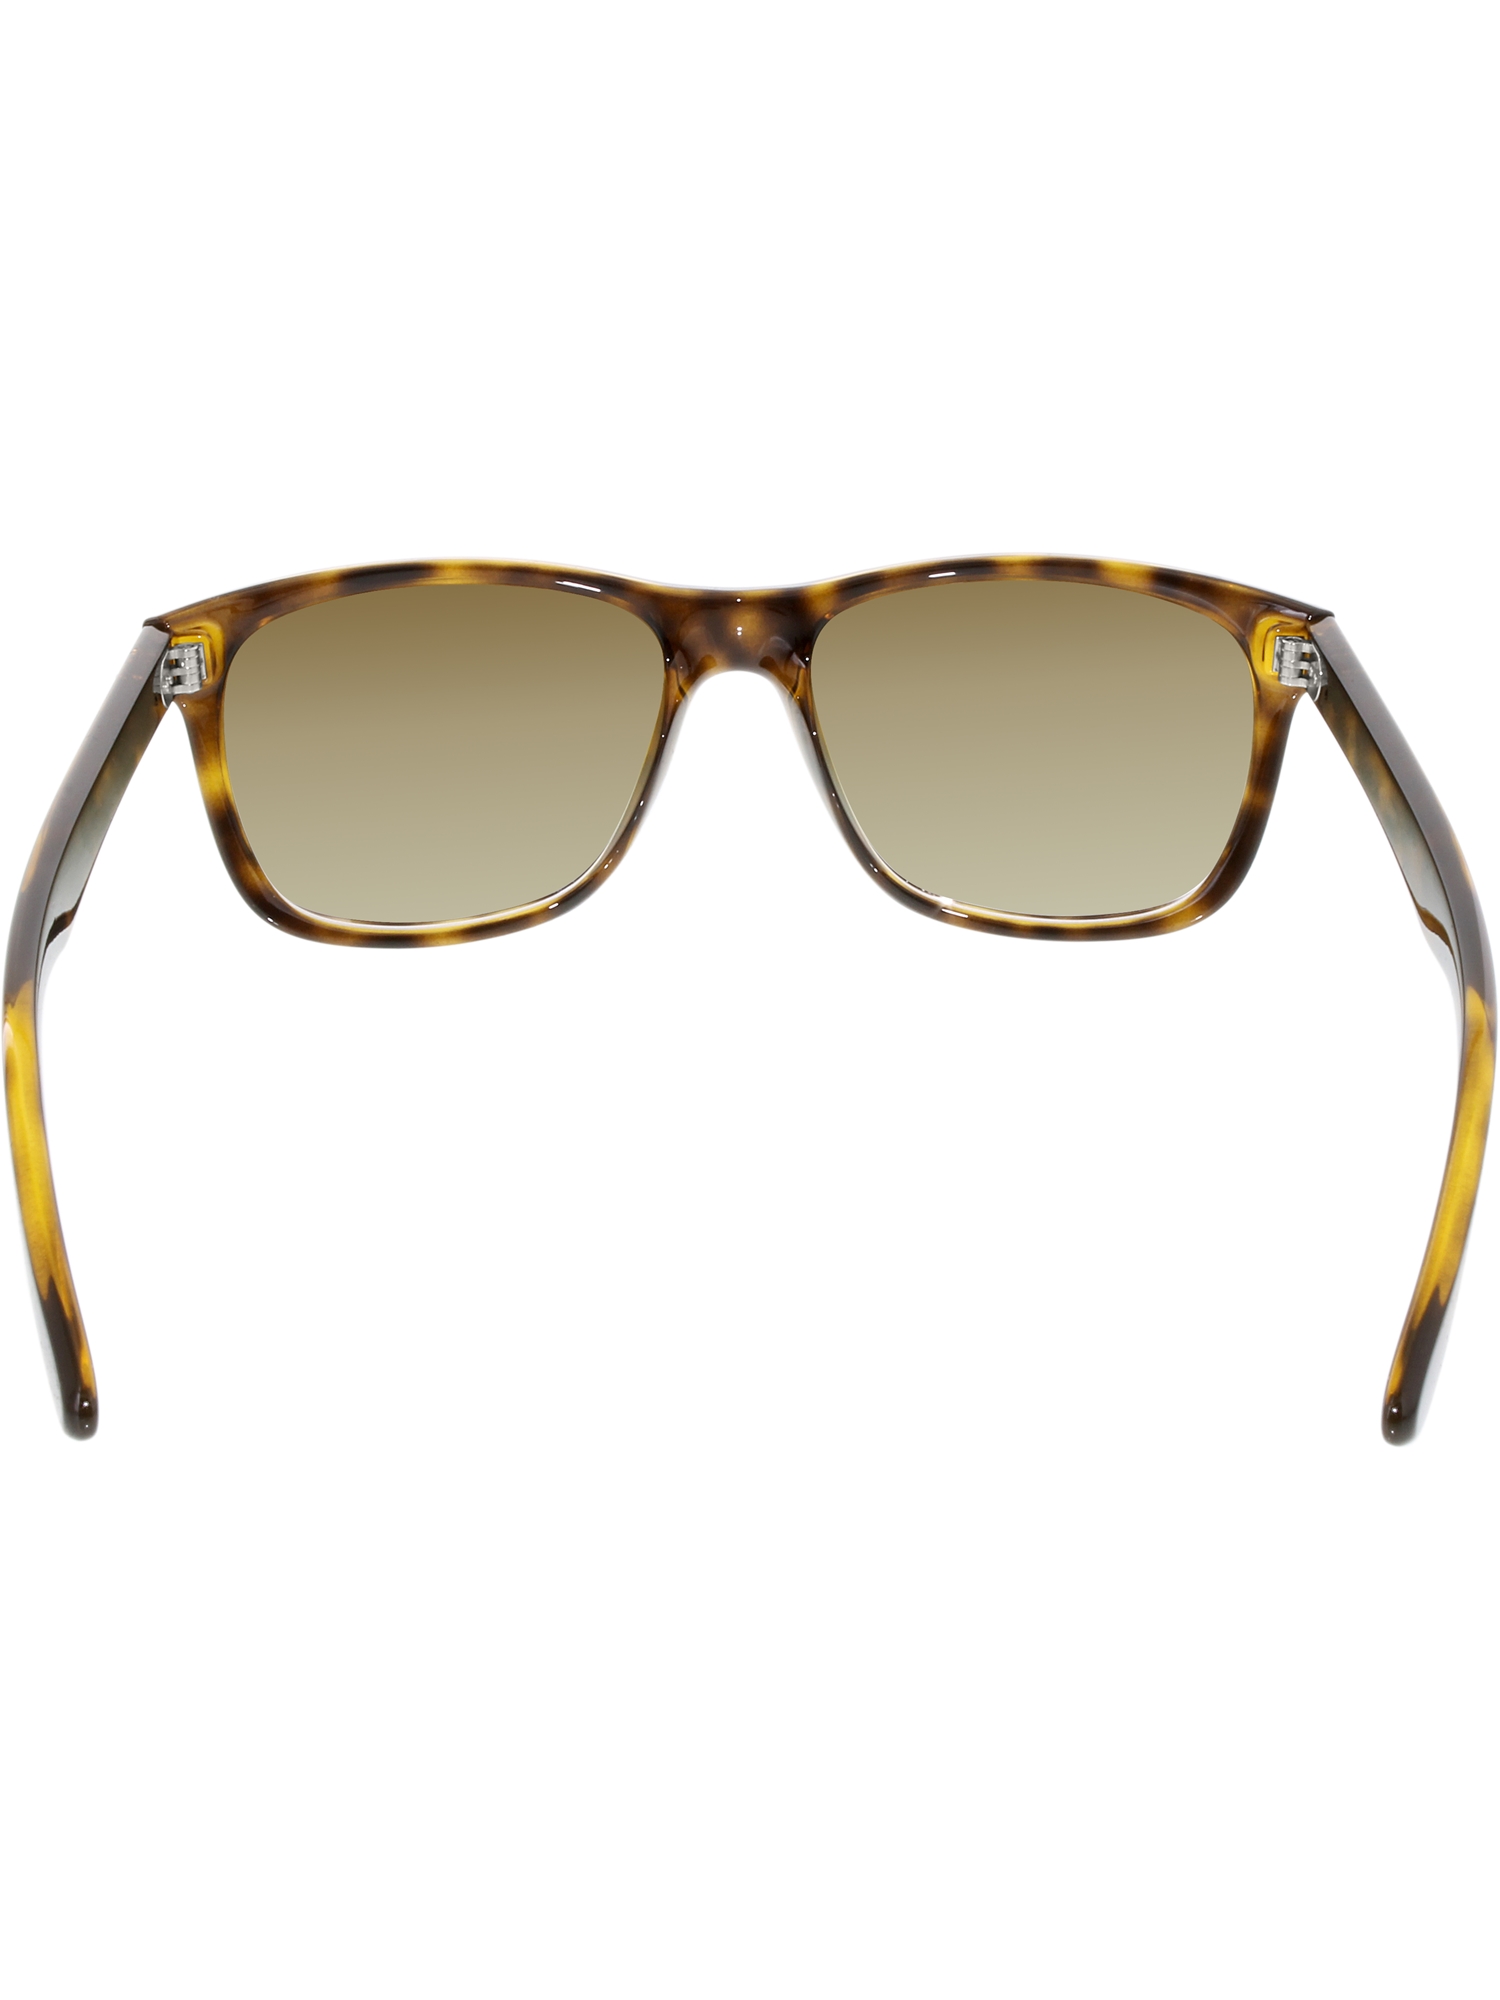 Ray Ban RB 4181 710/51 - Tortoise/Brown Gradient by Ray Ban for Men - 57-16-145 mm Sunglasses - image 3 of 3